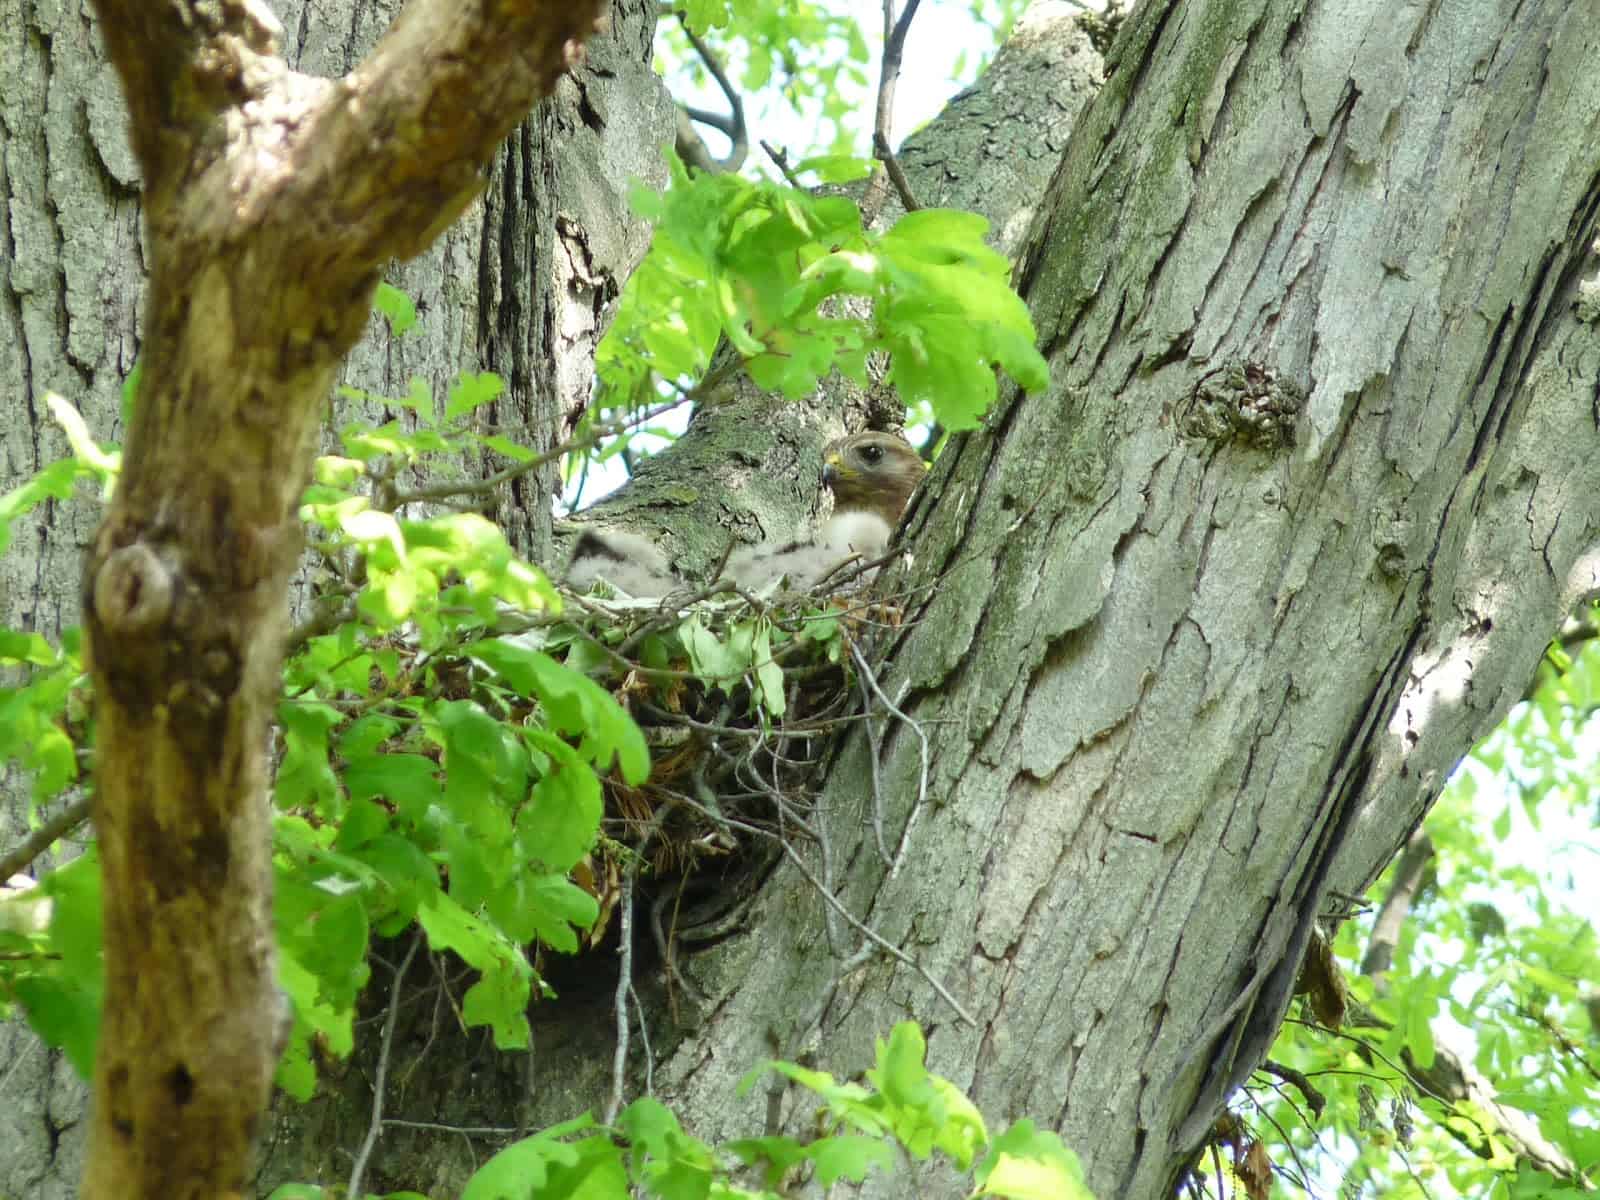 A Red-Shouldered Hawk sits on its nest in one of the Study trees